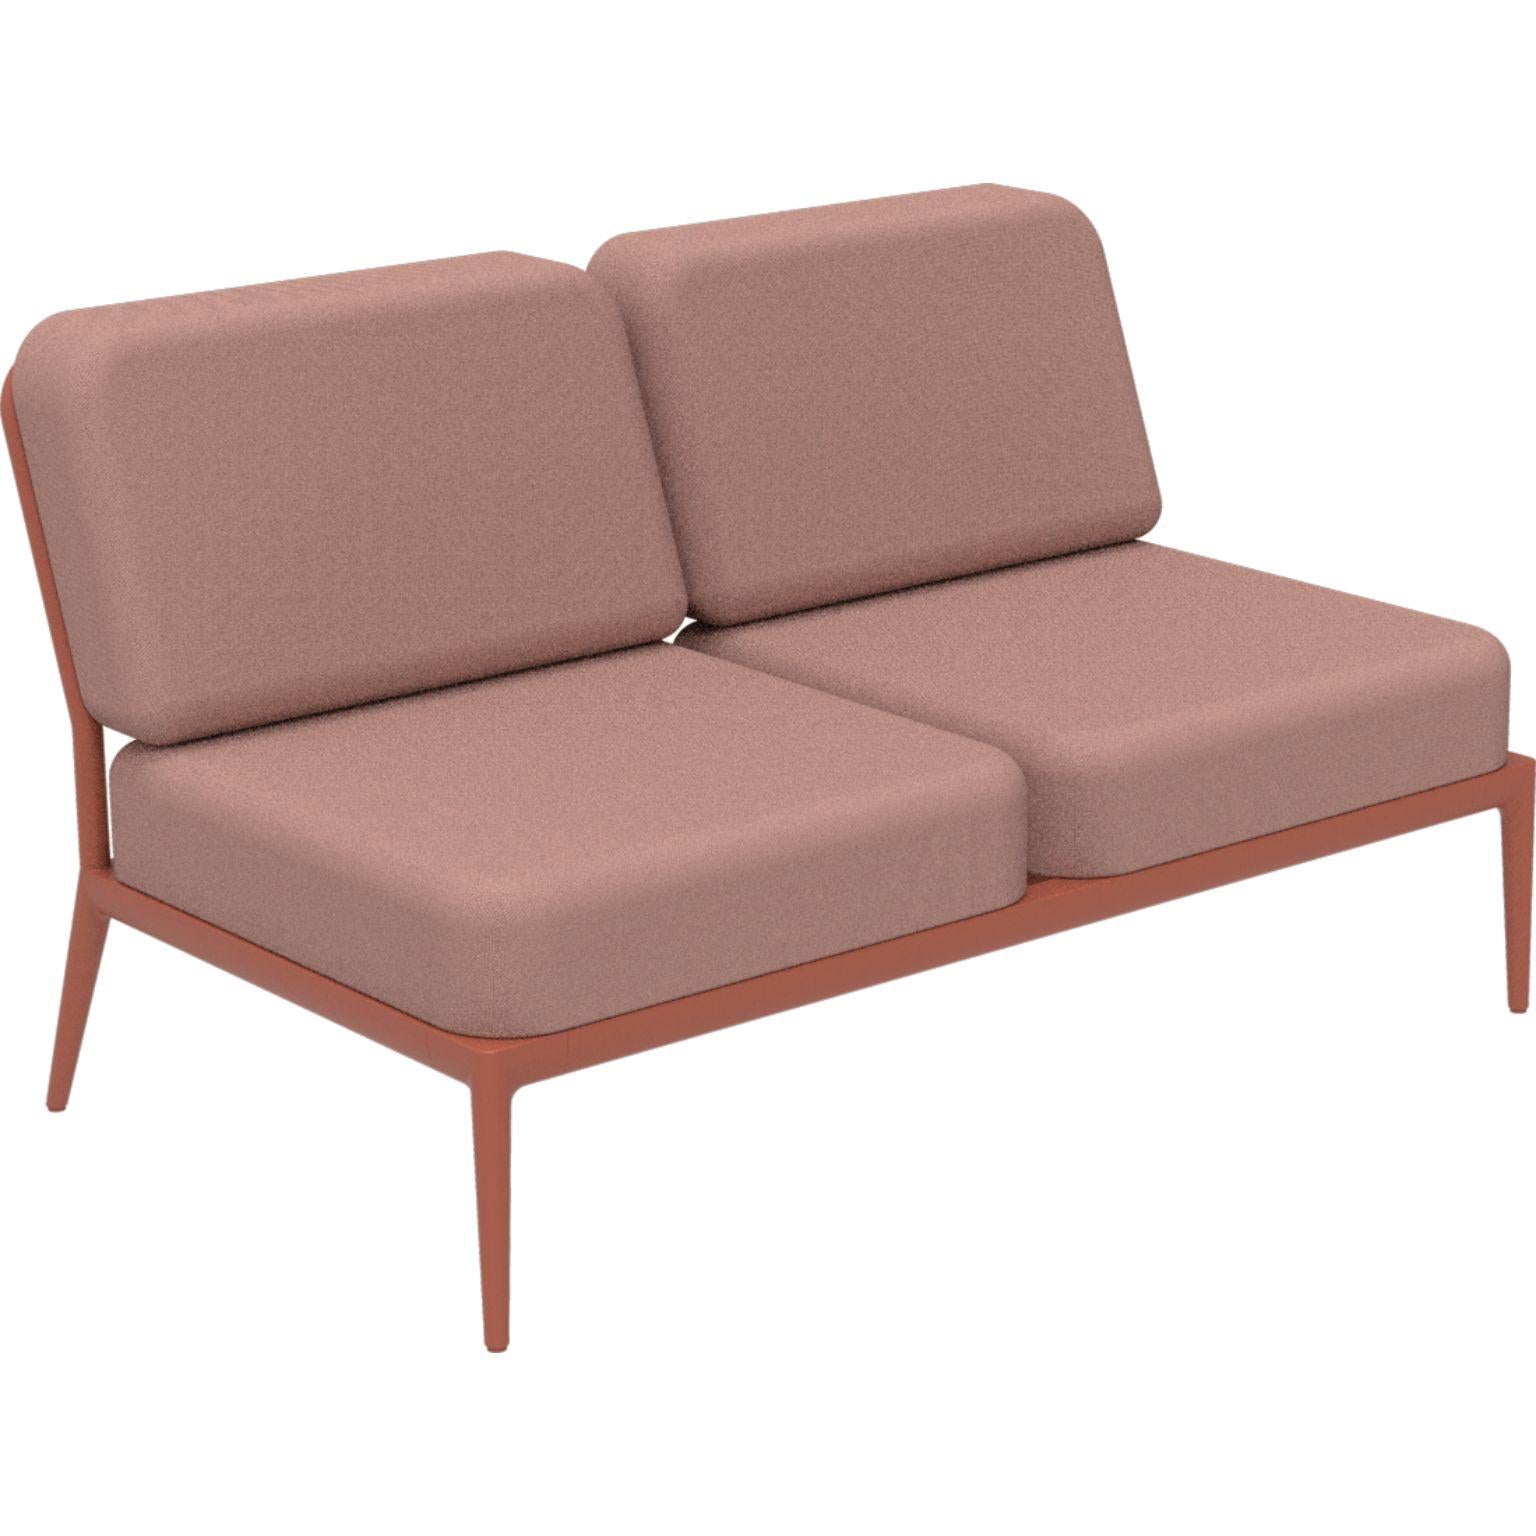 Nature Salmon double central modular sofa by MOWEE
Dimensions: D83 x W136 x H81 cm (seat height 42 cm).
Material: Aluminum and upholstery.
Weight: 27 kg.
Also available in different colors and finishes.

An unmistakable collection for its